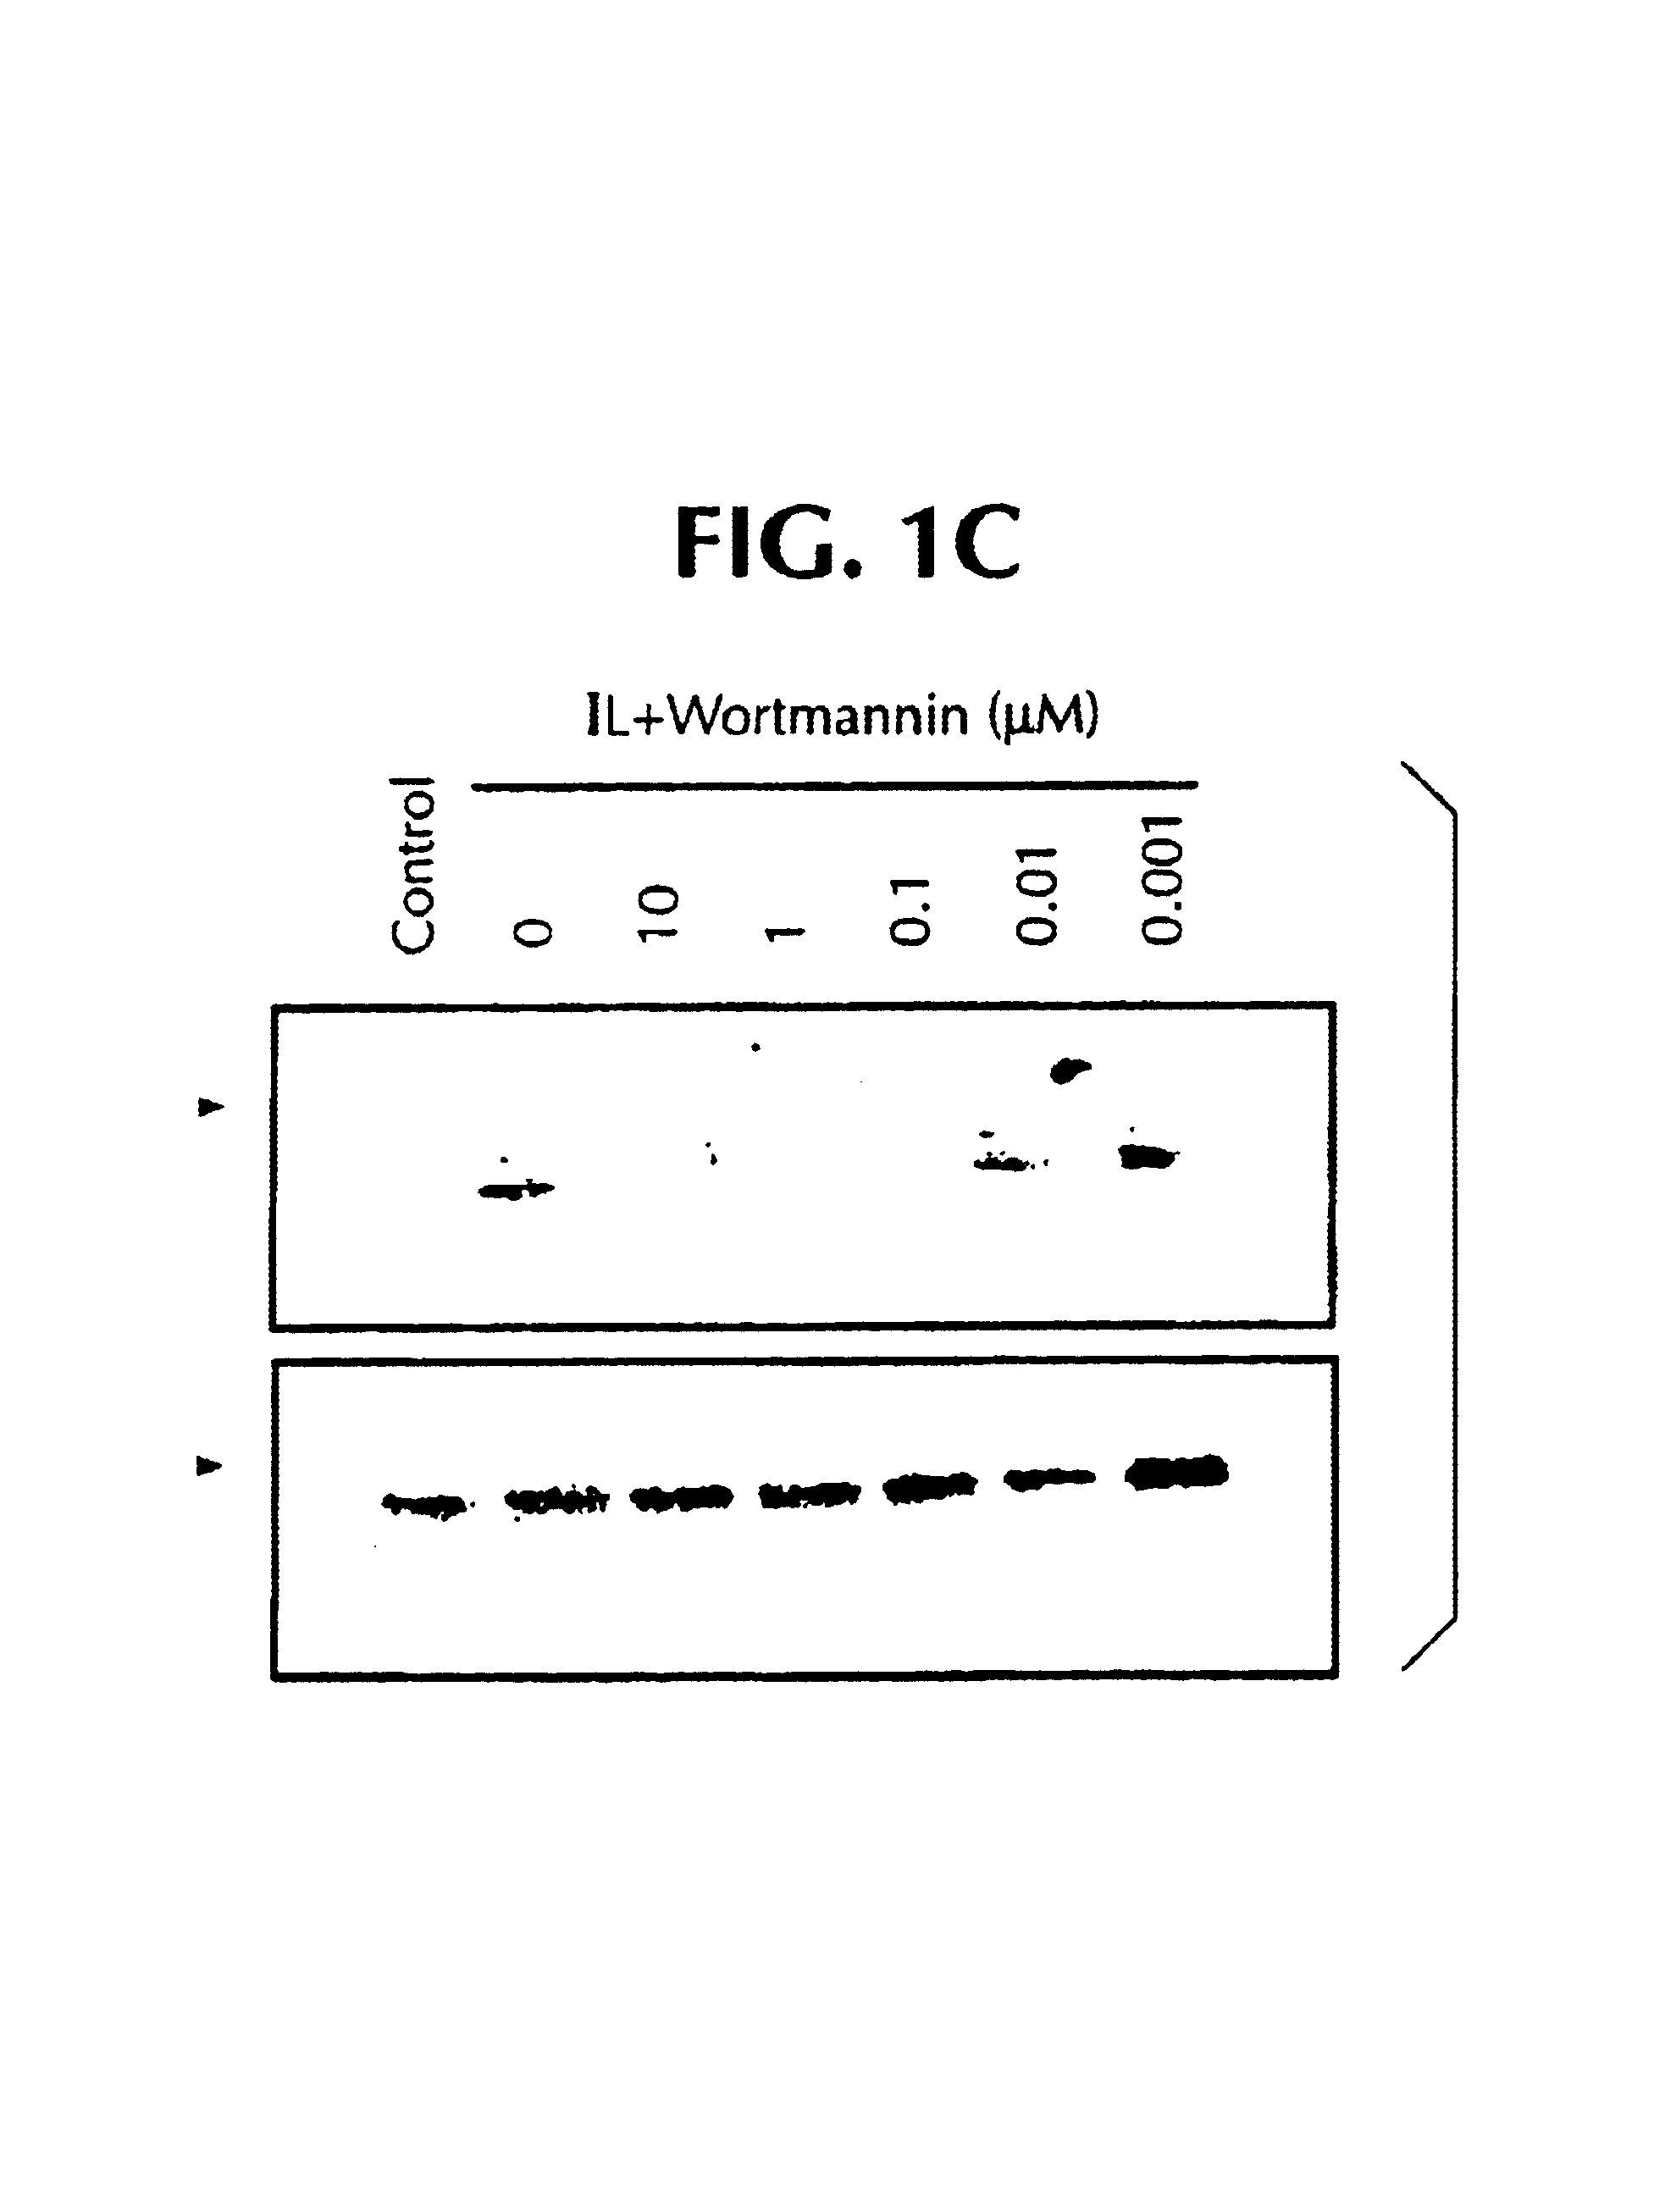 Method of treating or inhibiting neutrophil chemotaxis by administering a MEK inhibitor